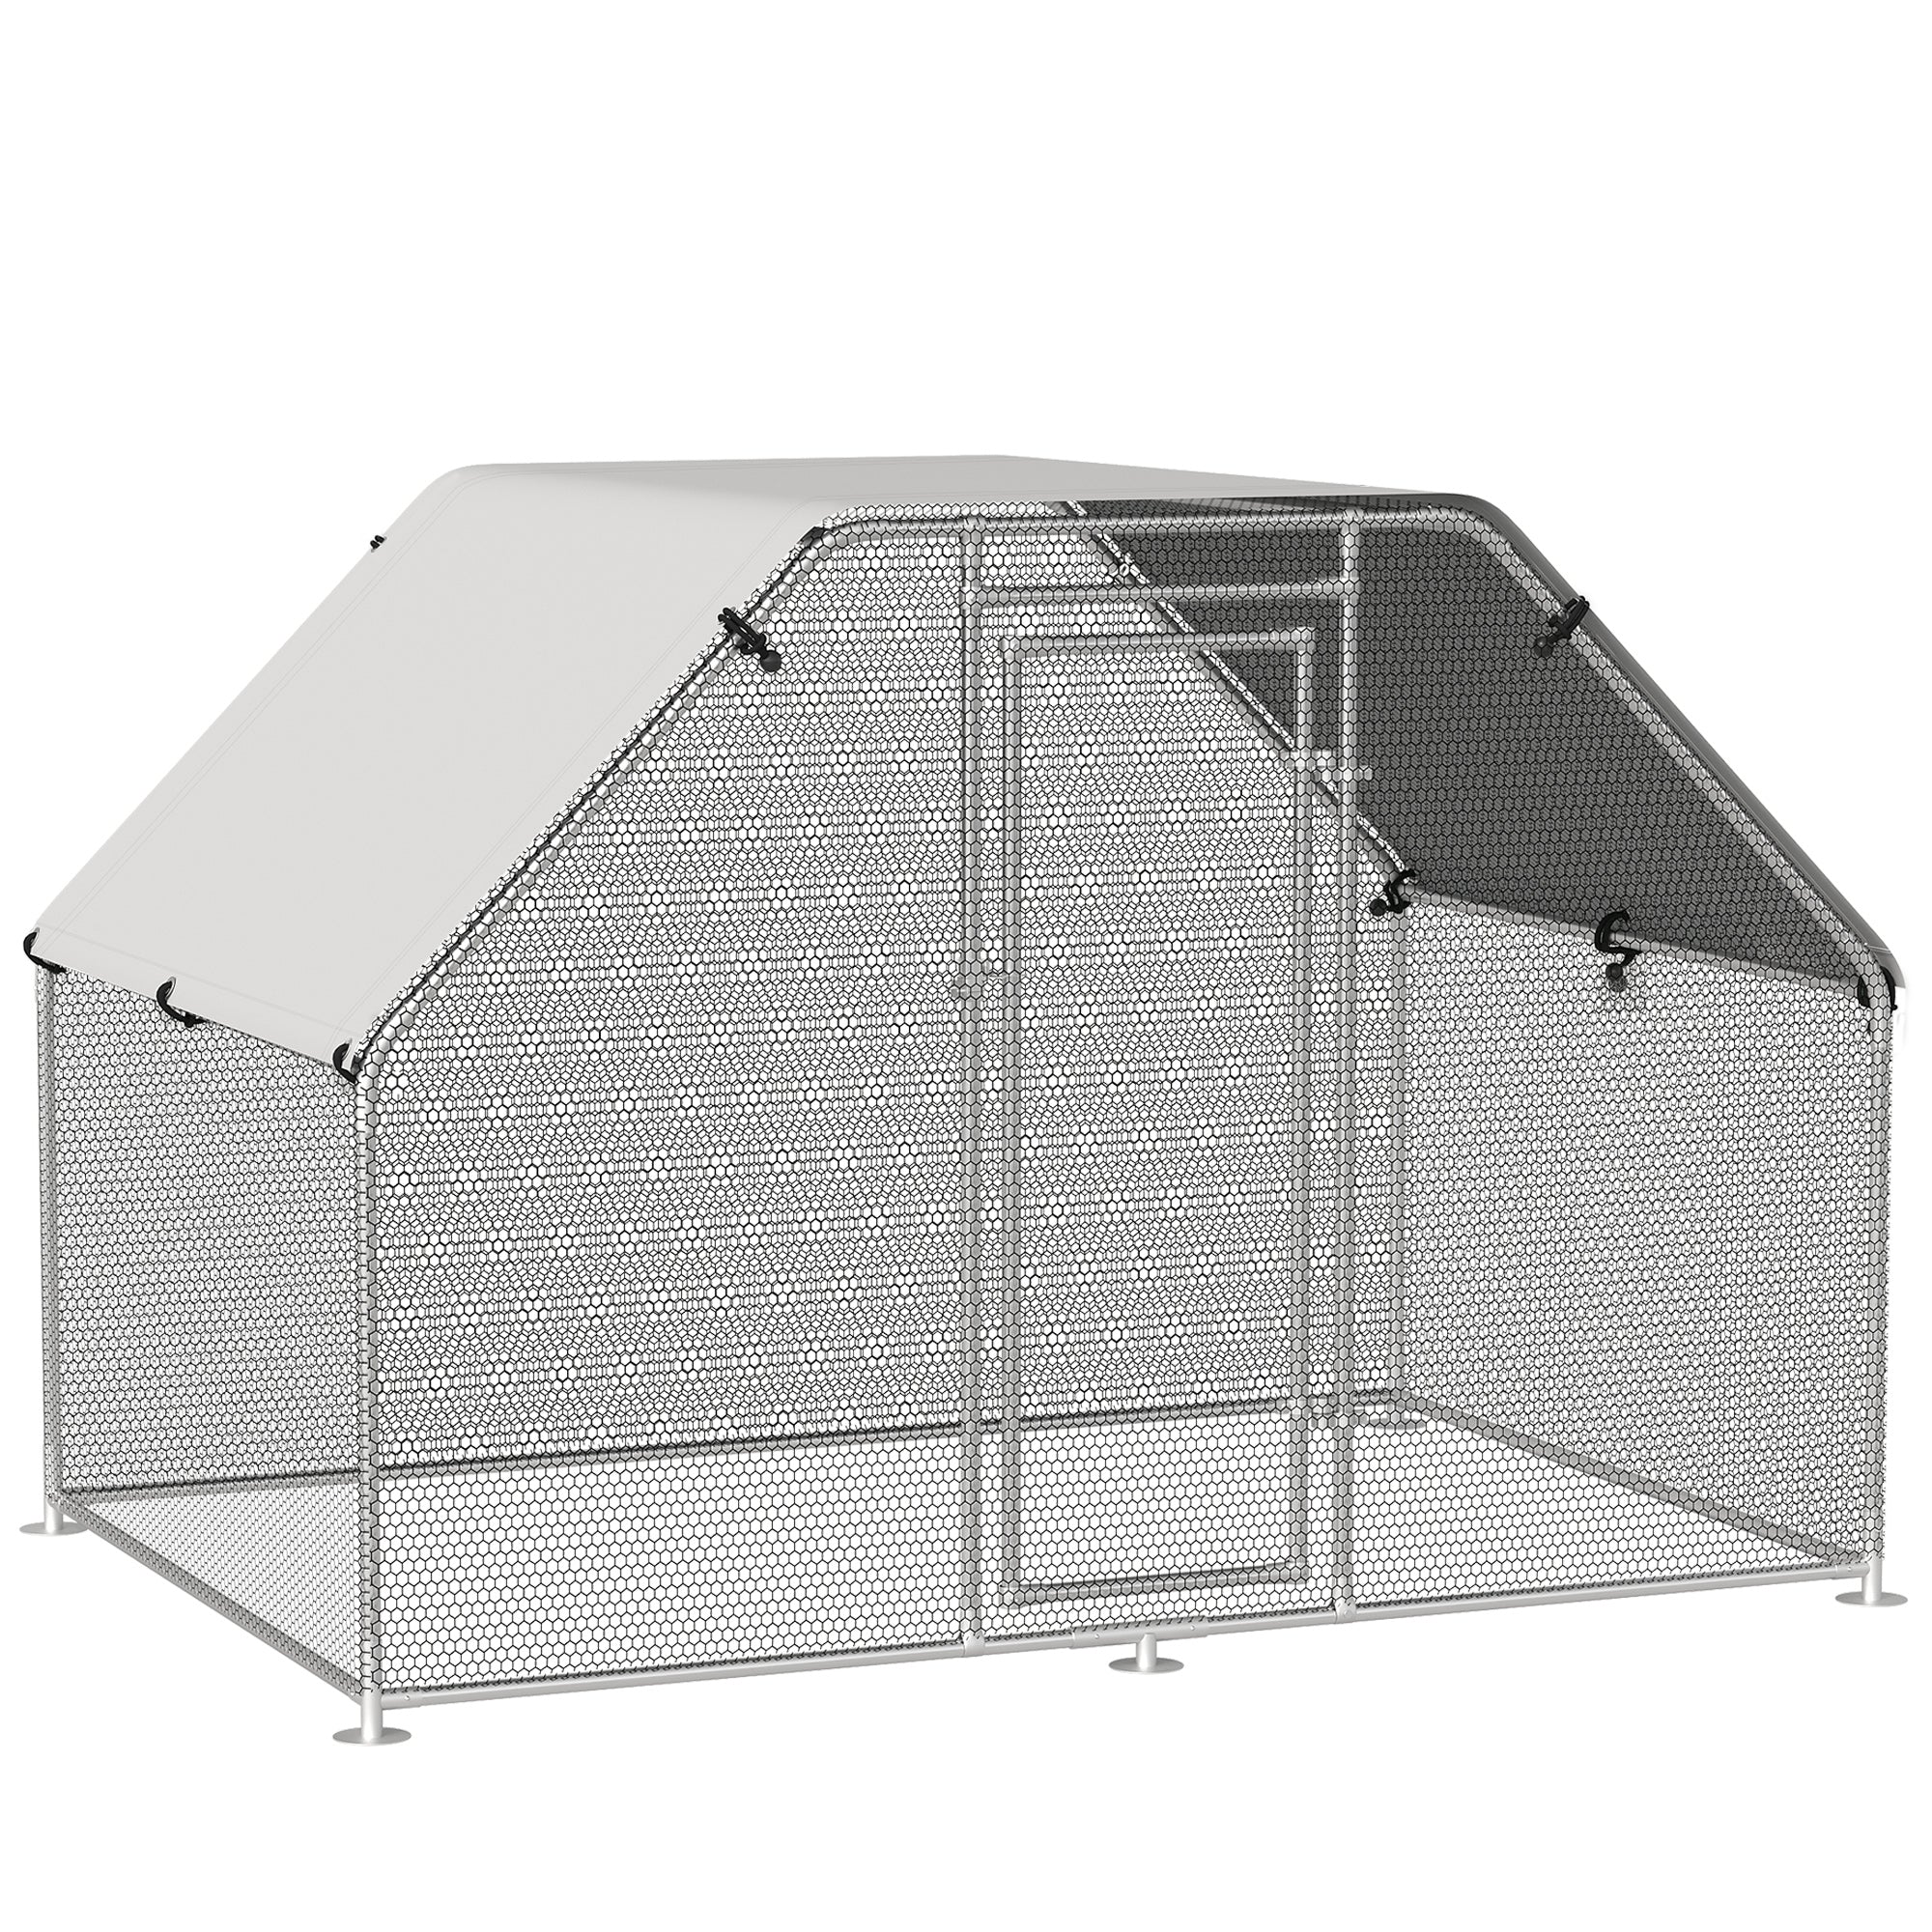 Large Outdoor Metal Chicken Run Cage with Cover, PawHut,